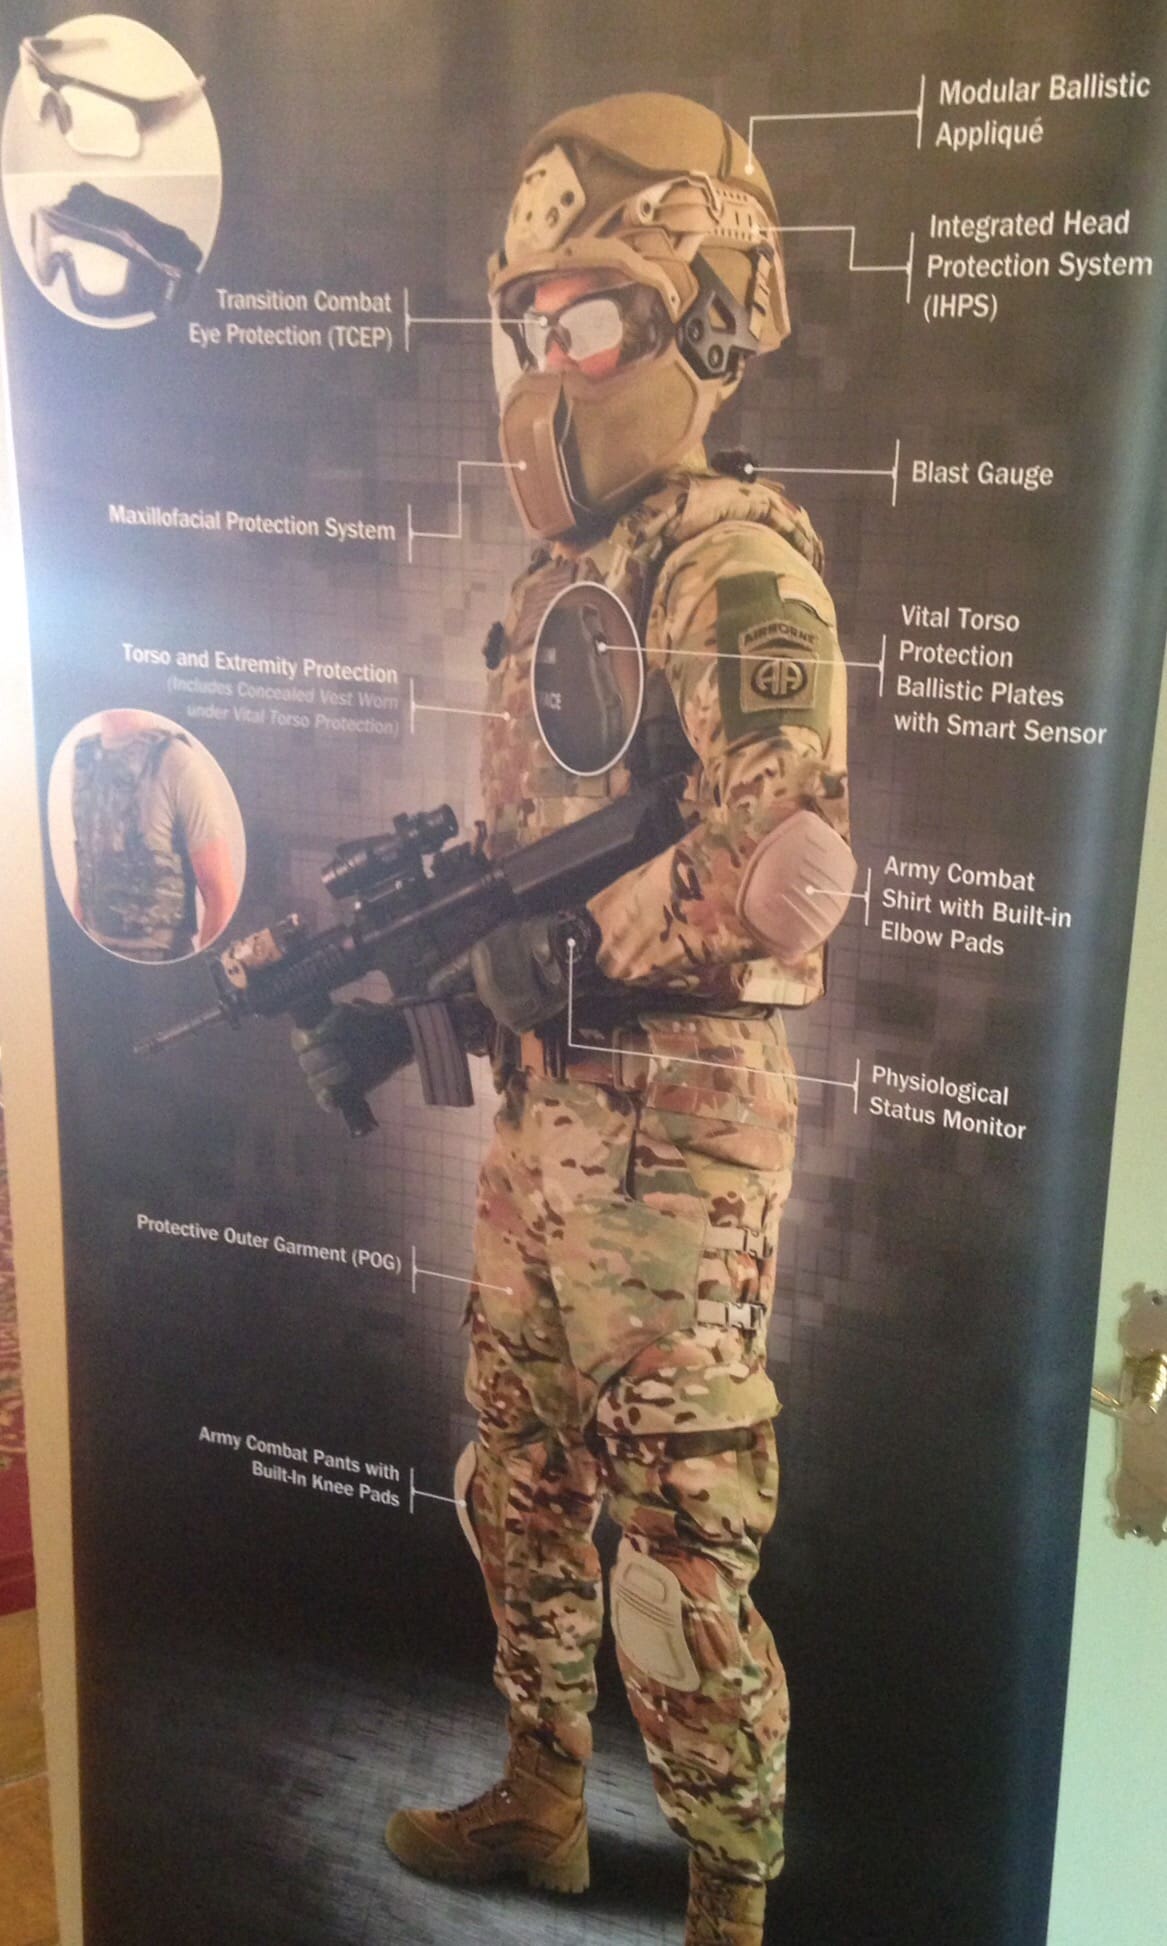 New Soldier armor weighs less, offers more options